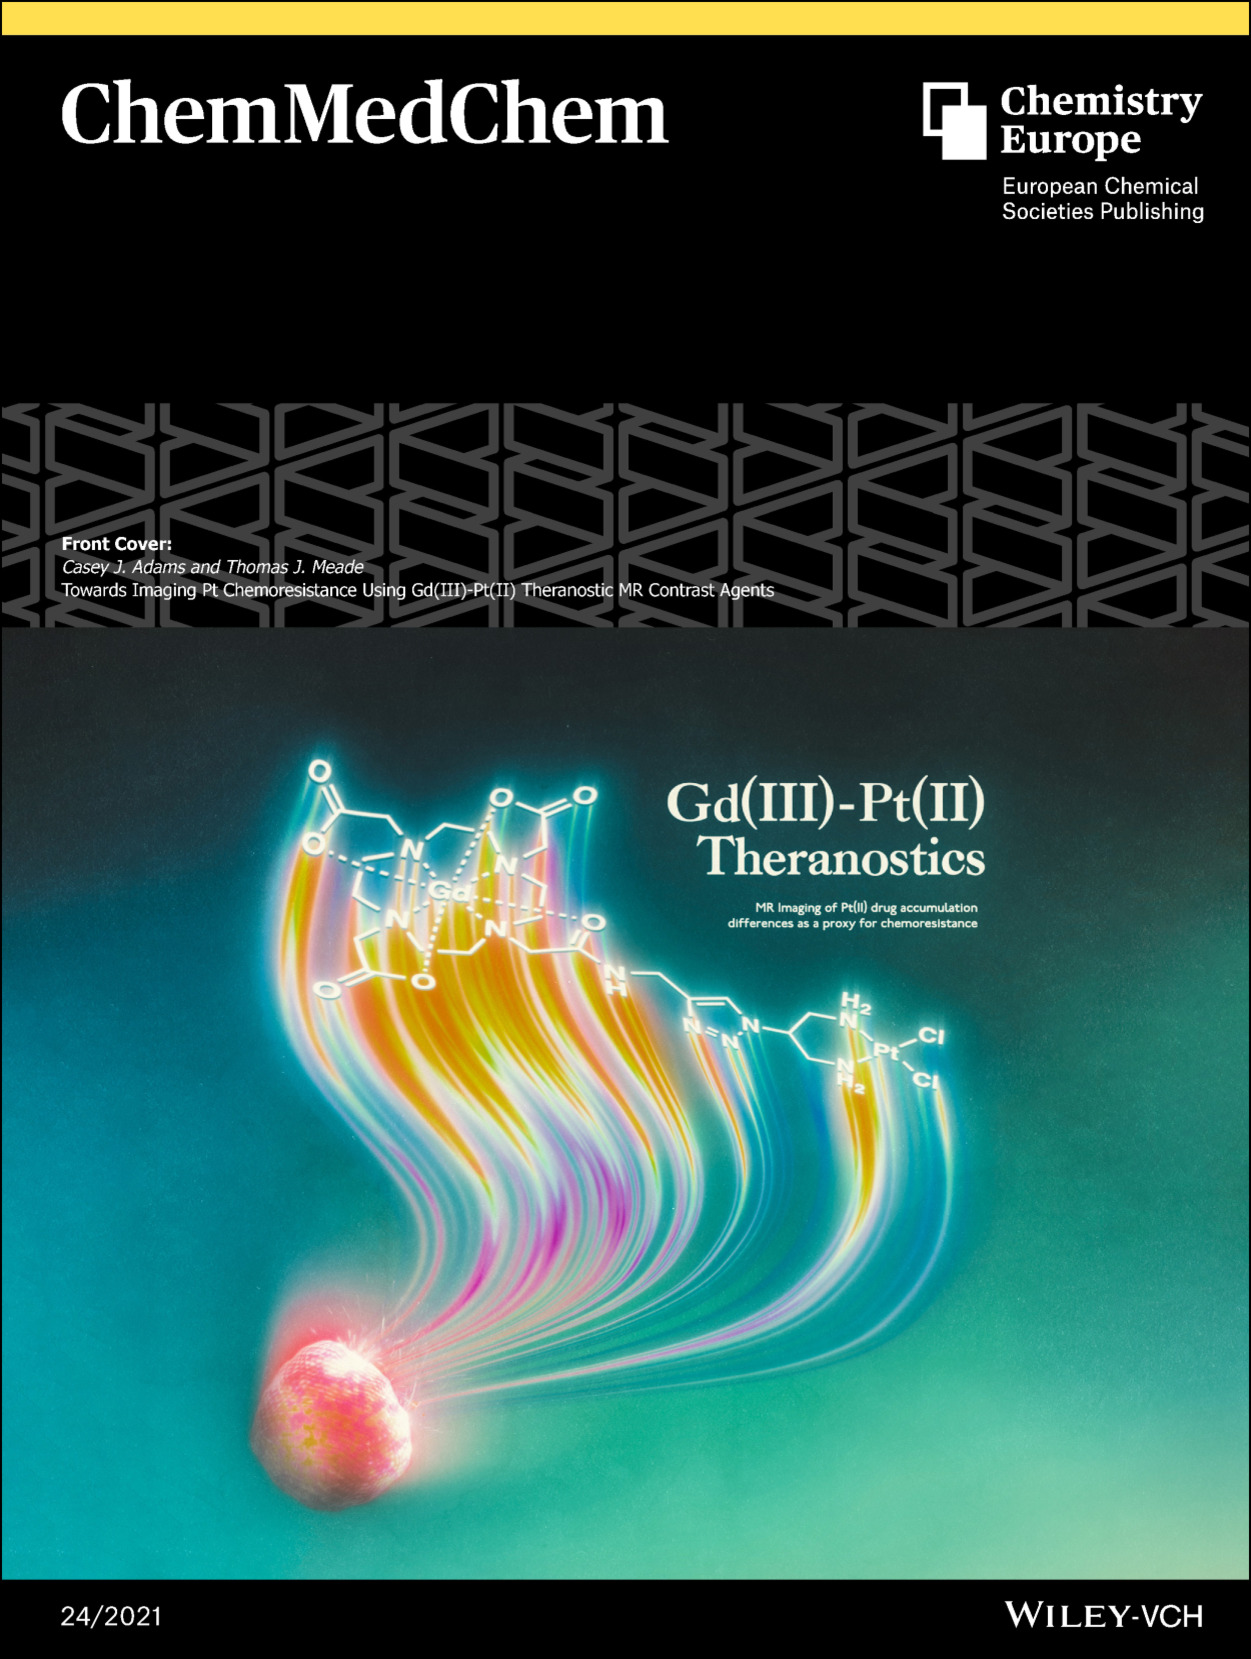 Front Cover: Towards Imaging Pt Chemoresistance Using Gd(III)‐Pt(II) Theranostic MR Contrast Agents (ChemMedChem 24/2021)